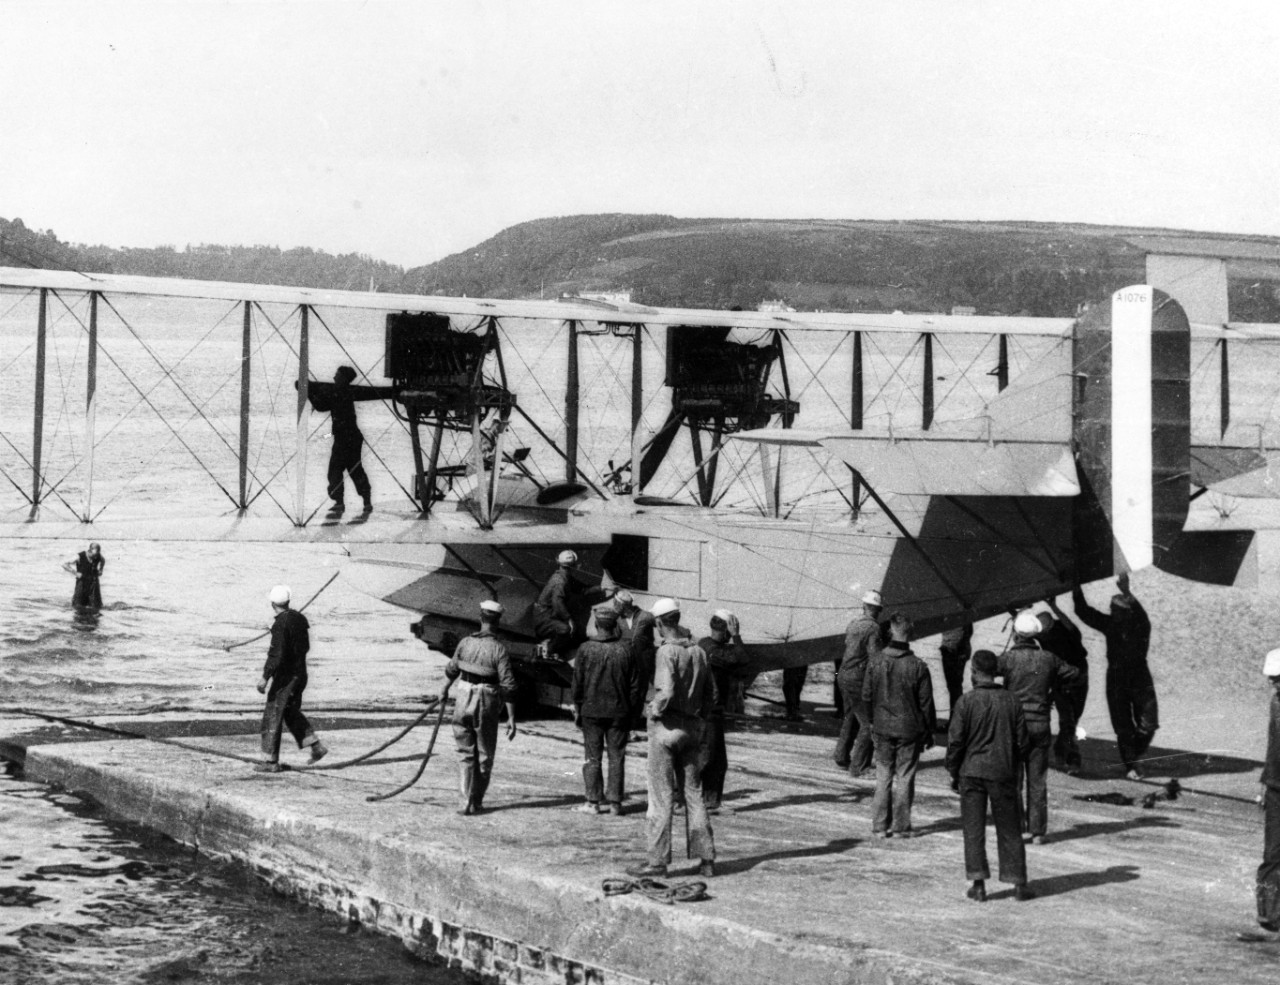 Naval Aircraft Factory H-16 (BUNO A-1076) at Queenstown, Ireland. This plane was designed by Curtiss and produced by N.A.F., 1918. 